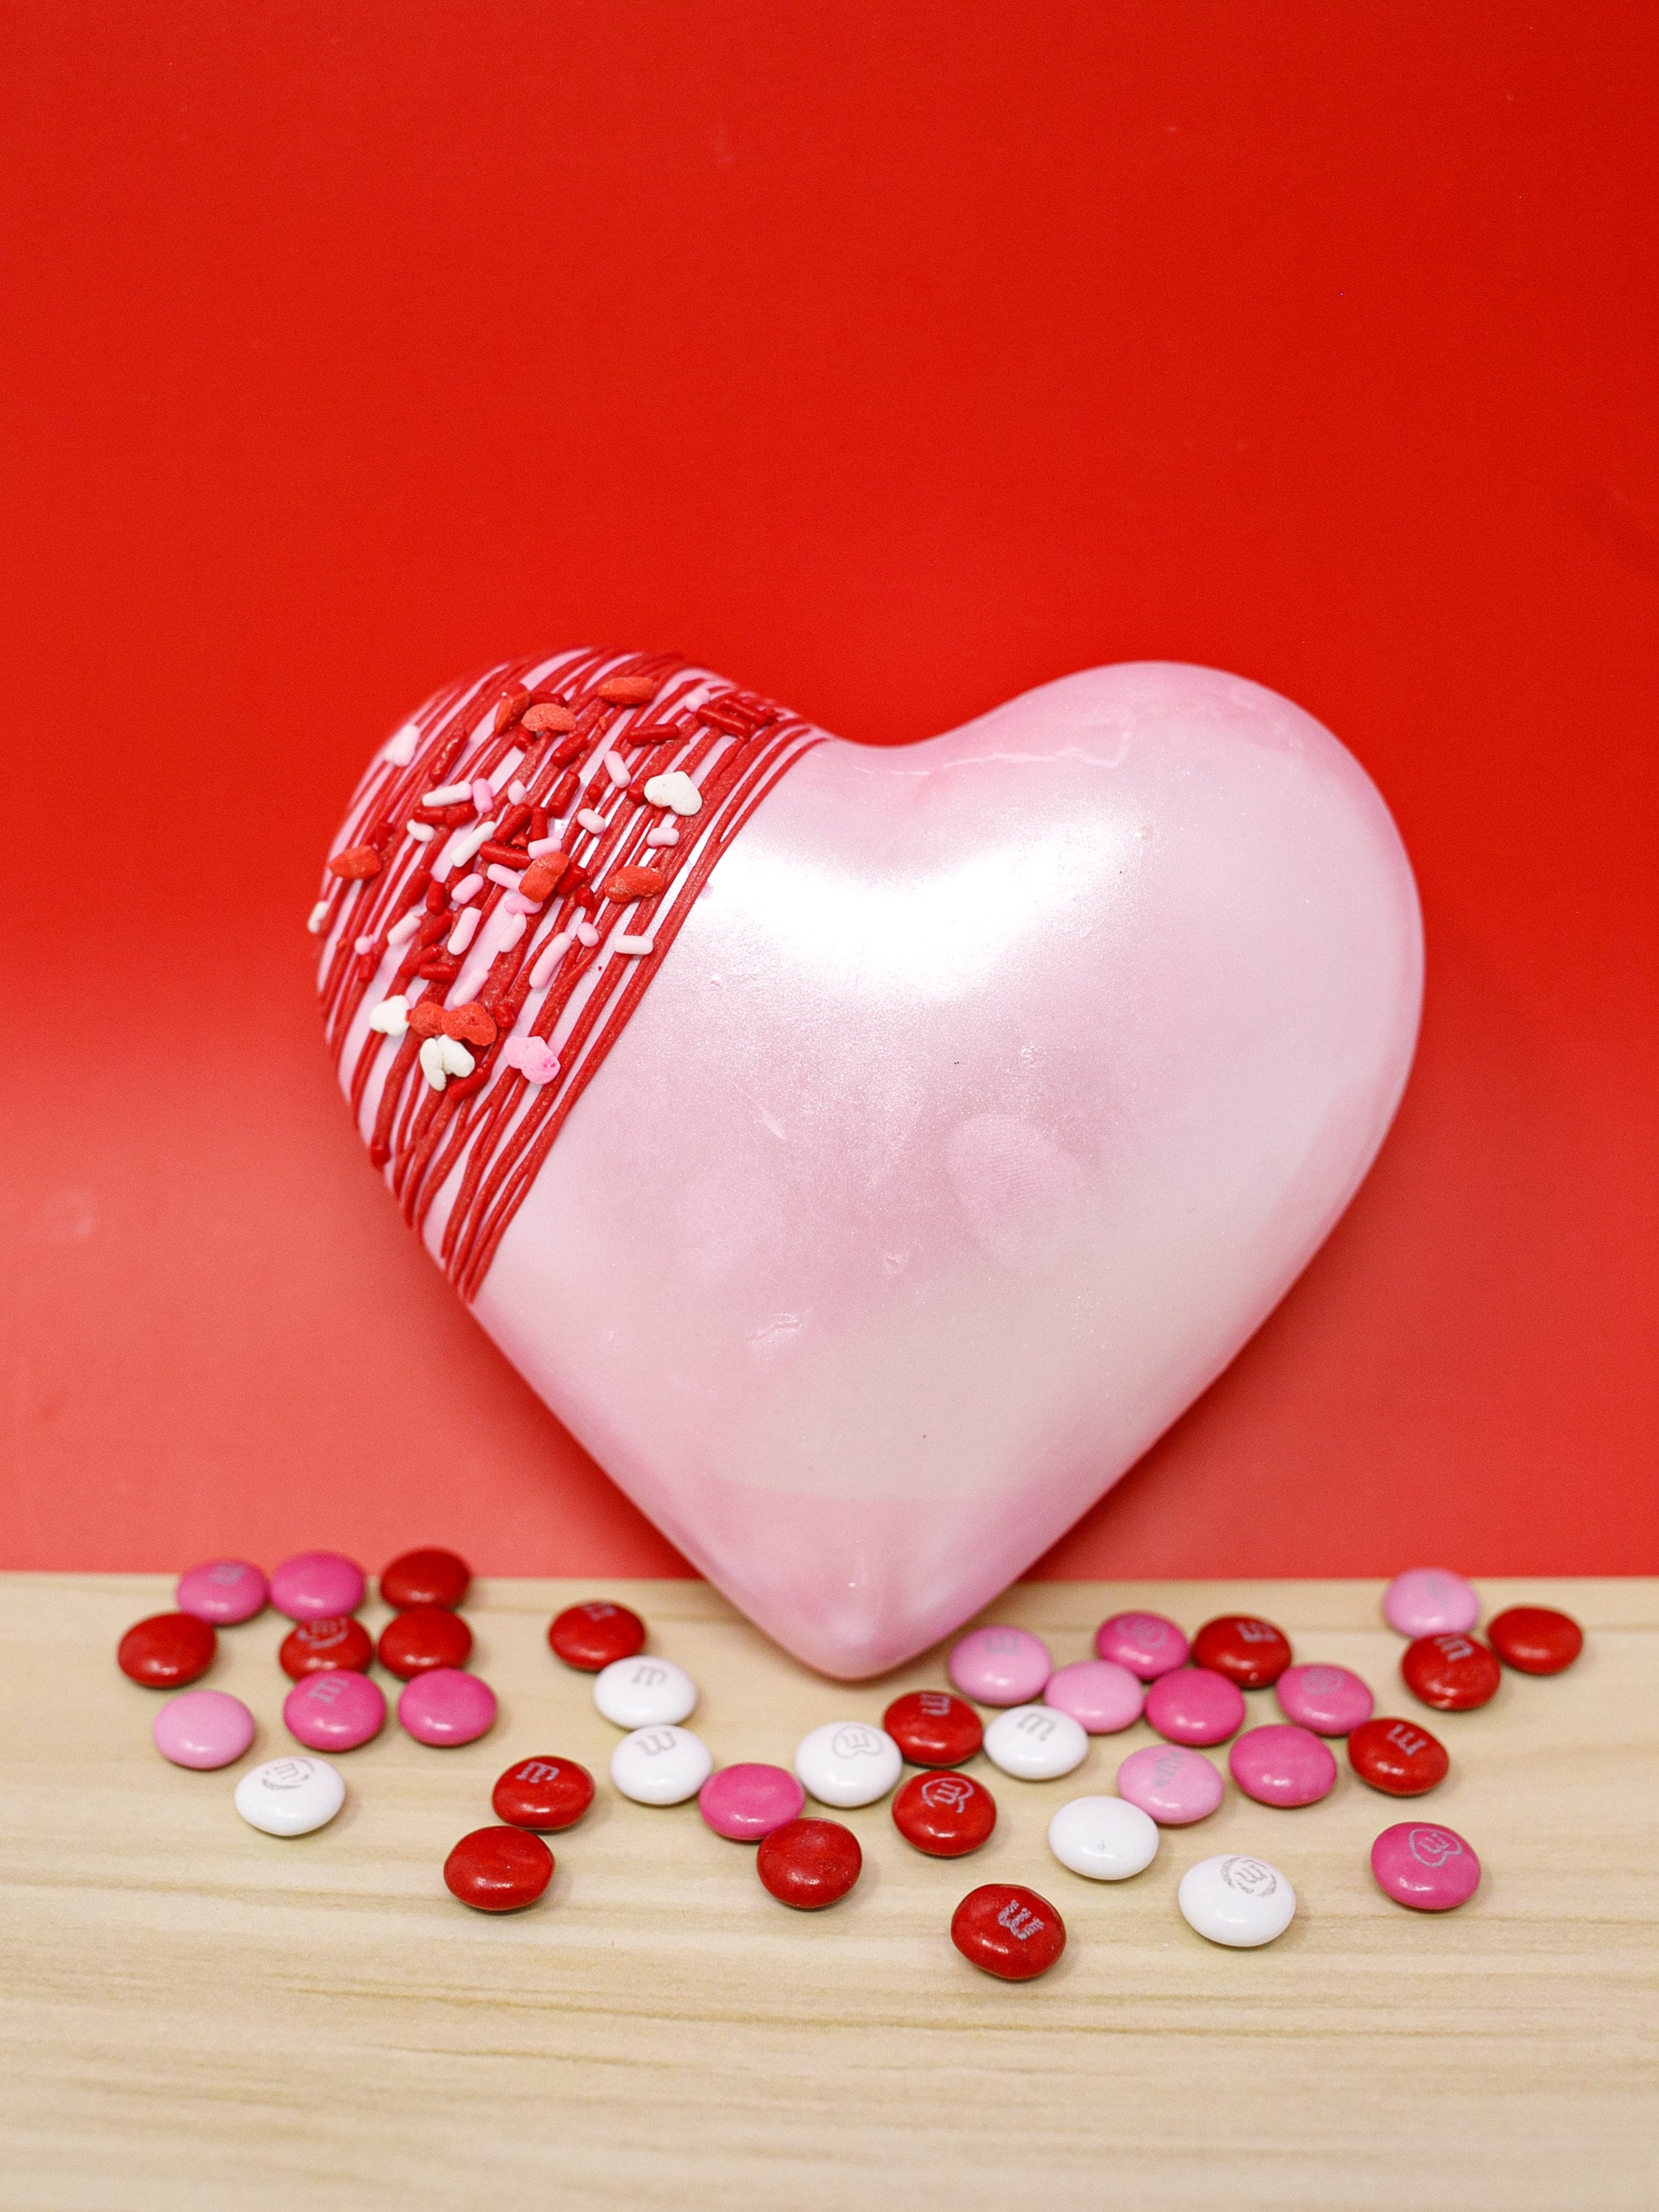 HOT 2021 Breakable Heart Silicone Molds For Chocolate Diamond Cake Mold  Breakable Heart Molds For Chocolate Mousse Cake Baking From Hot Wind, $0.02